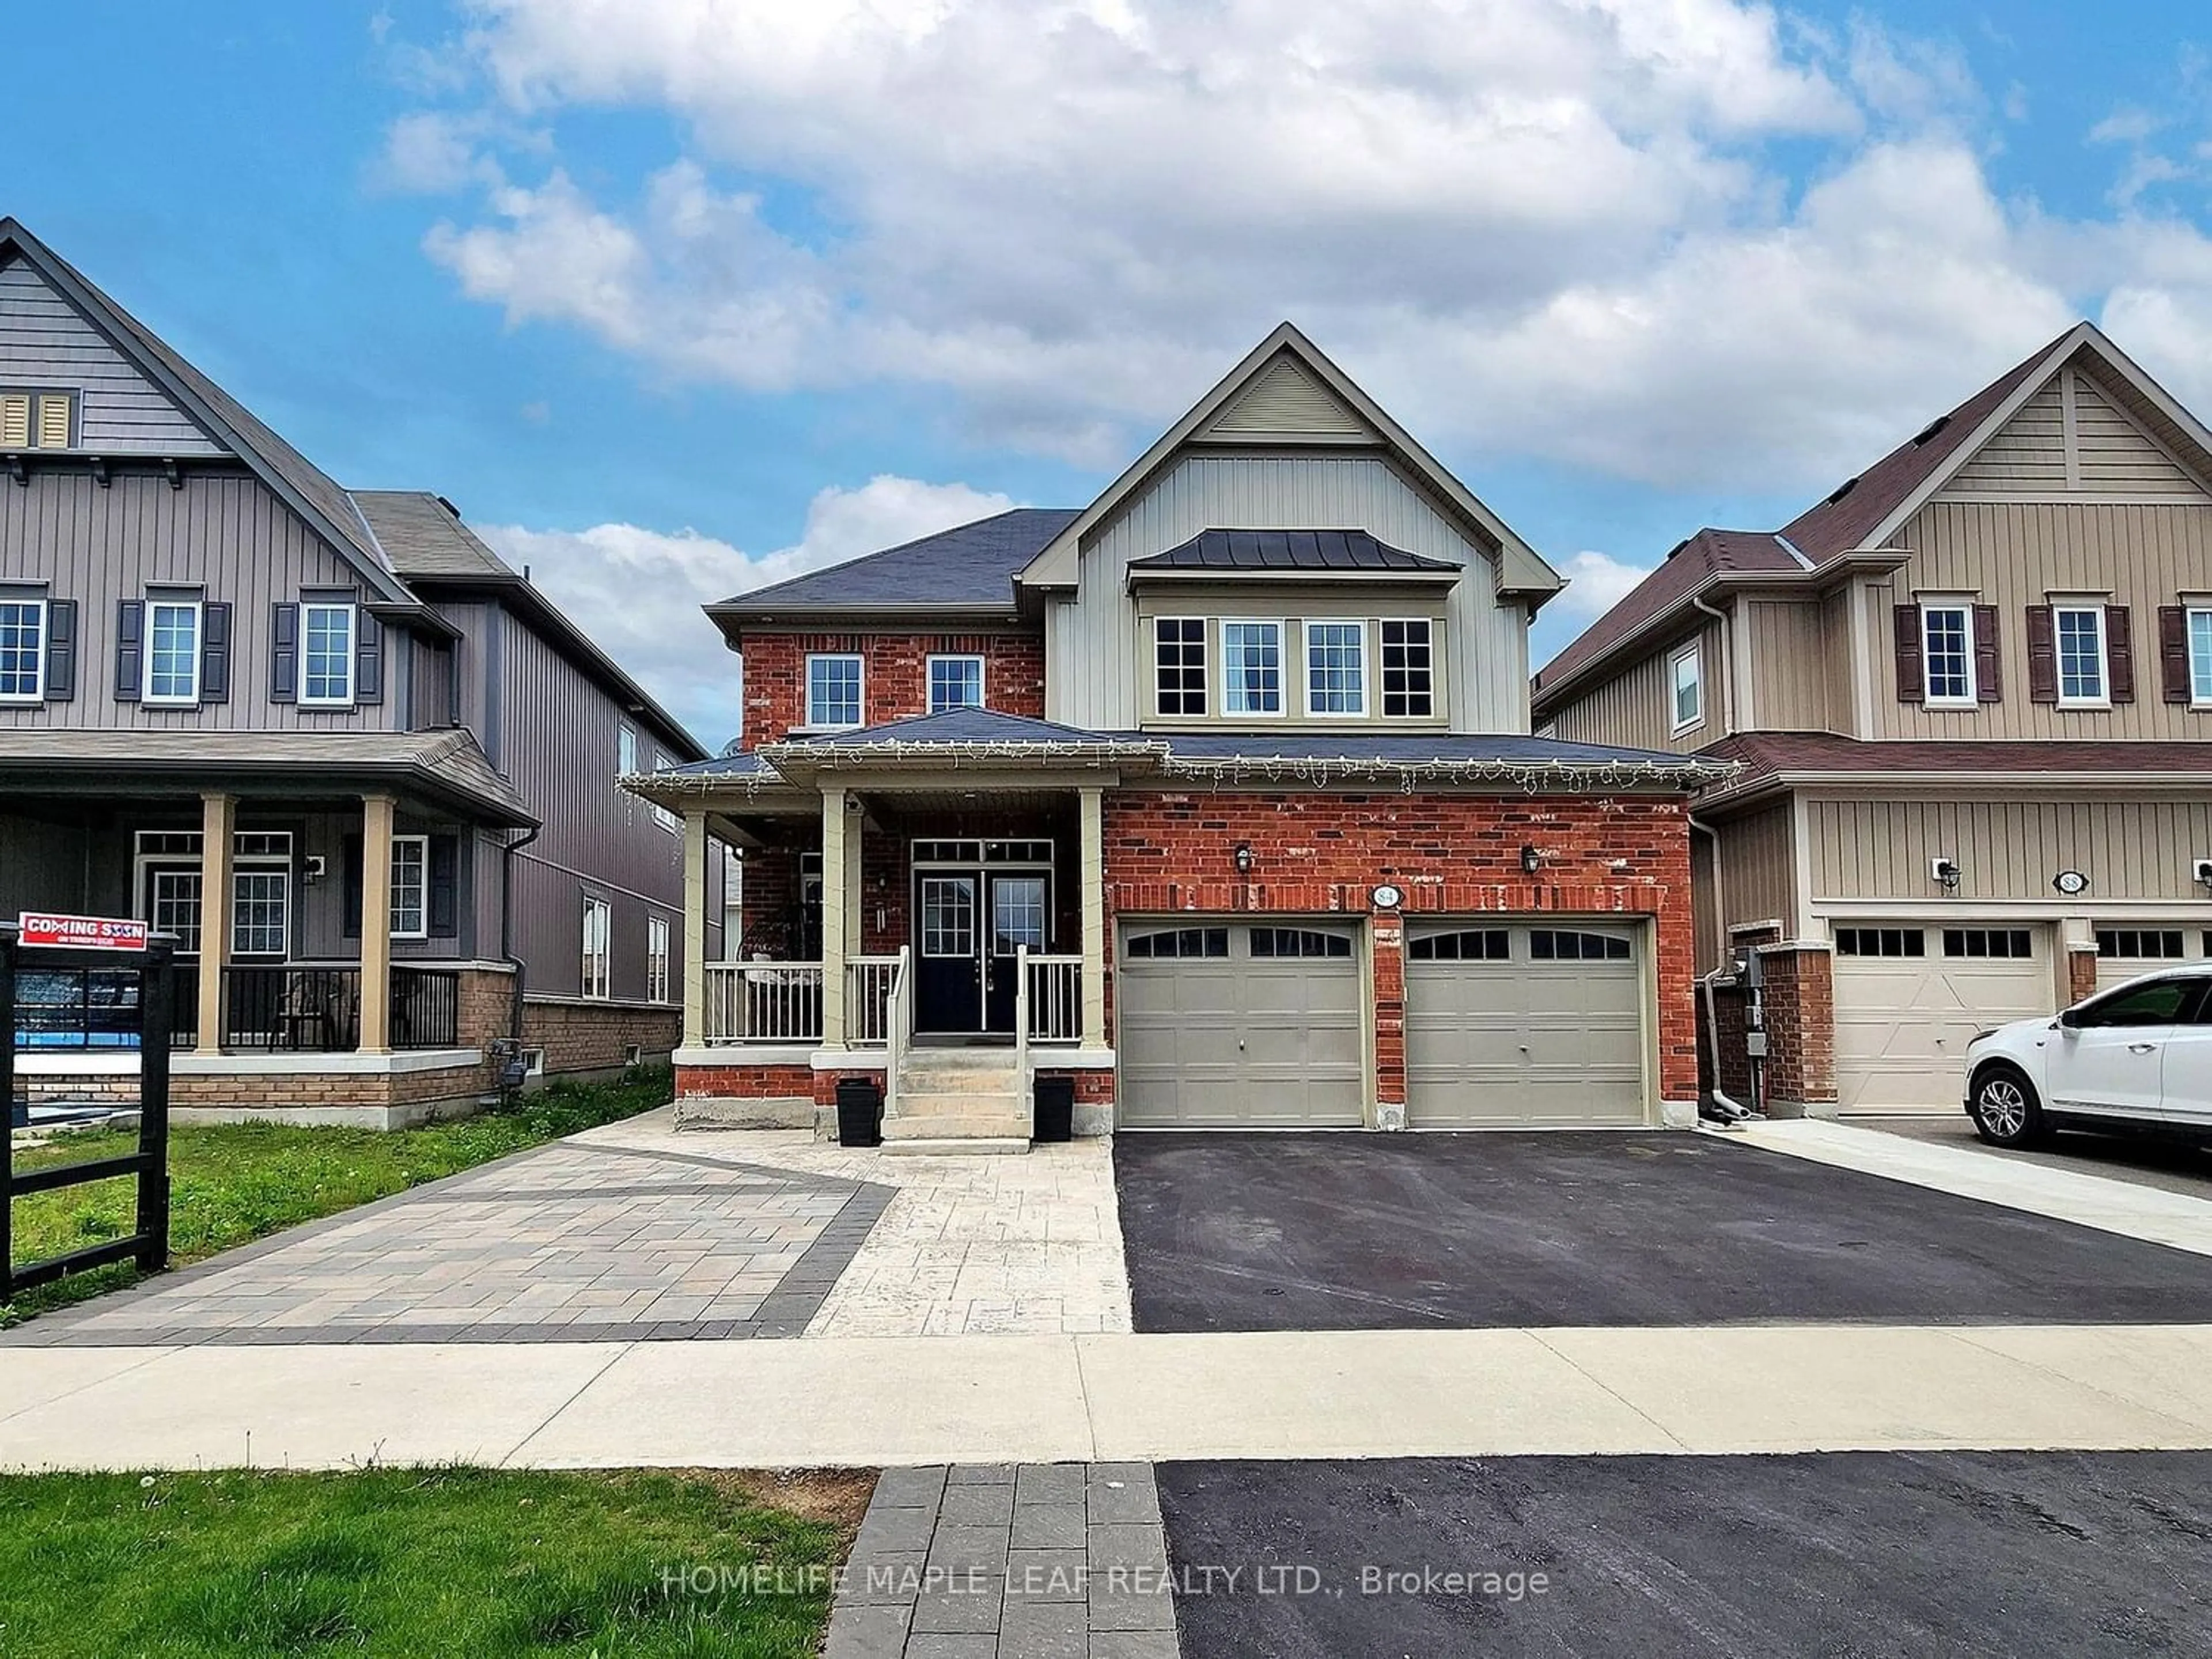 Frontside or backside of a home for 84 William Fair Dr, Clarington Ontario L1C 0T2